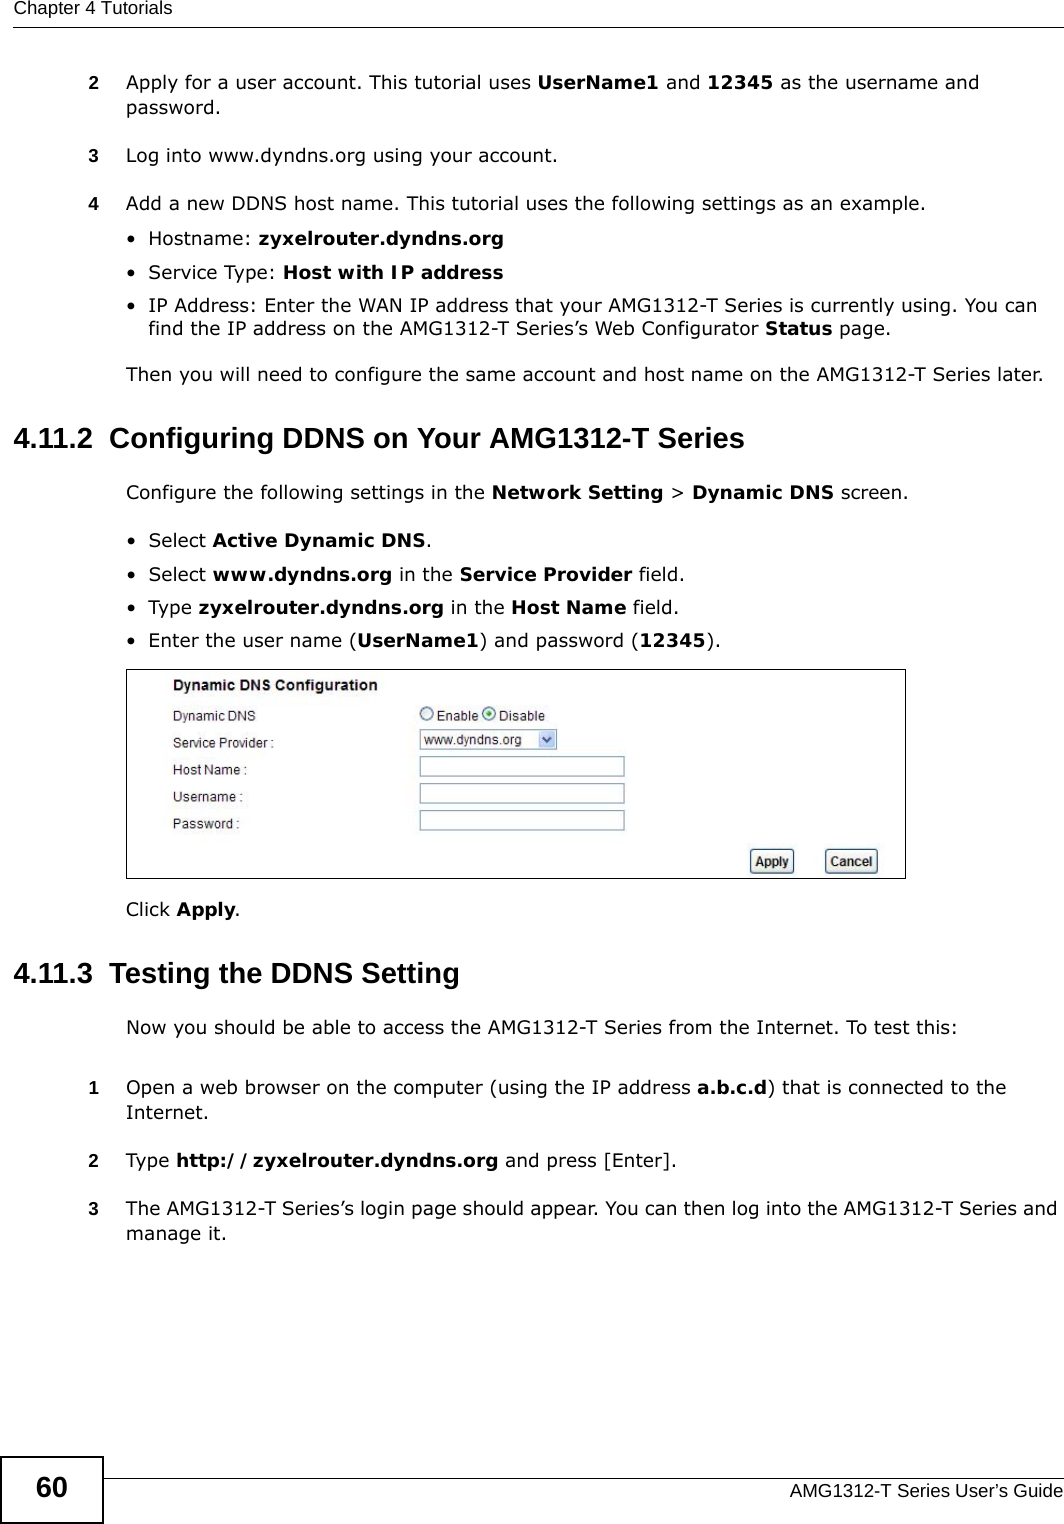 Chapter 4 TutorialsAMG1312-T Series User’s Guide602Apply for a user account. This tutorial uses UserName1 and 12345 as the username and password.3Log into www.dyndns.org using your account.4Add a new DDNS host name. This tutorial uses the following settings as an example.•Hostname: zyxelrouter.dyndns.org•Service Type: Host with IP address• IP Address: Enter the WAN IP address that your AMG1312-T Series is currently using. You can find the IP address on the AMG1312-T Series’s Web Configurator Status page.Then you will need to configure the same account and host name on the AMG1312-T Series later.4.11.2  Configuring DDNS on Your AMG1312-T SeriesConfigure the following settings in the Network Setting &gt; Dynamic DNS screen.•Select Active Dynamic DNS.•Select www.dyndns.org in the Service Provider field.•Type zyxelrouter.dyndns.org in the Host Name field.• Enter the user name (UserName1) and password (12345).Click Apply.4.11.3  Testing the DDNS SettingNow you should be able to access the AMG1312-T Series from the Internet. To test this:1Open a web browser on the computer (using the IP address a.b.c.d) that is connected to the Internet.2Type http://zyxelrouter.dyndns.org and press [Enter].3The AMG1312-T Series’s login page should appear. You can then log into the AMG1312-T Series and manage it.